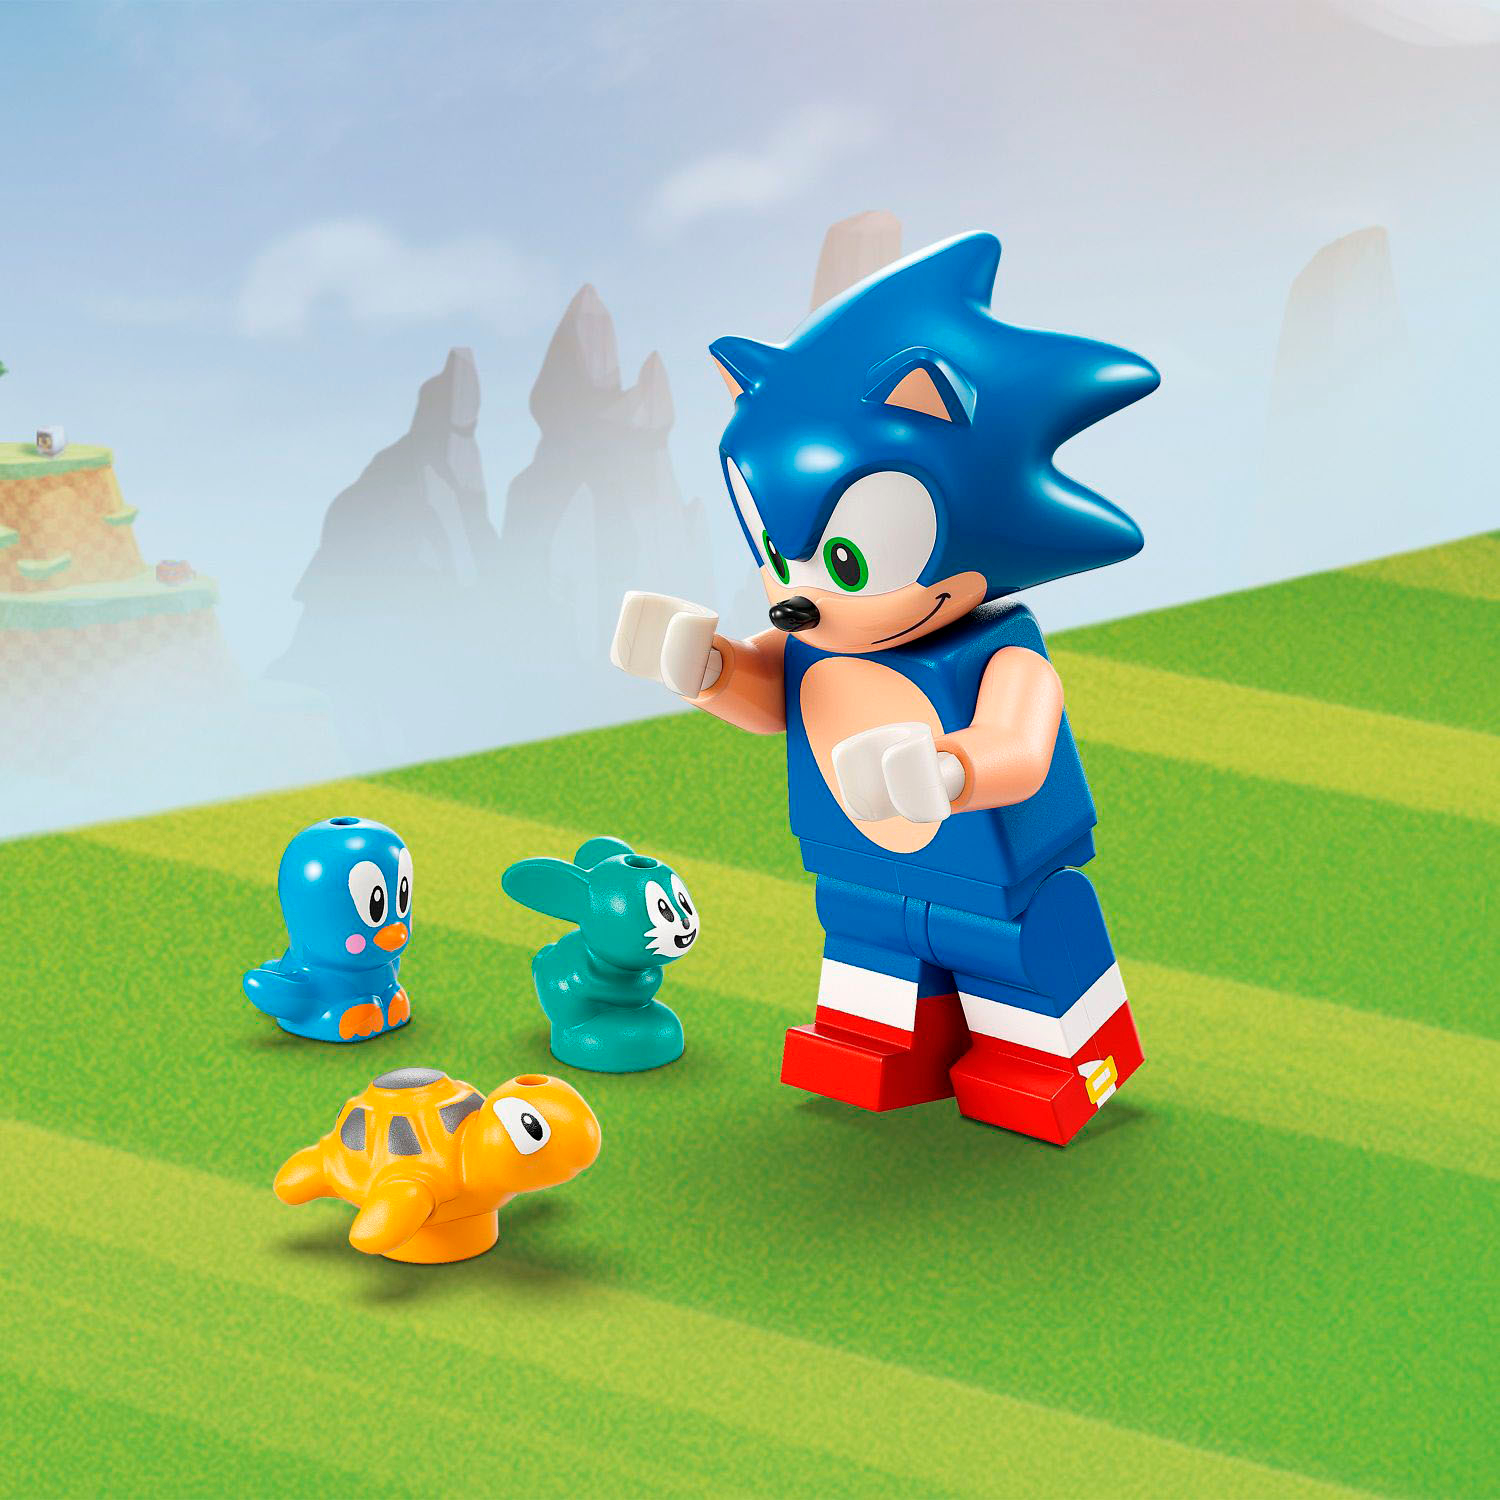 Sonic the Hedgehog on X: LEGO® Sonic is real and he can hurt you (if you  step on him). Grab a picture at the @LEGO_Group booth at #SDCC, and snag  the new